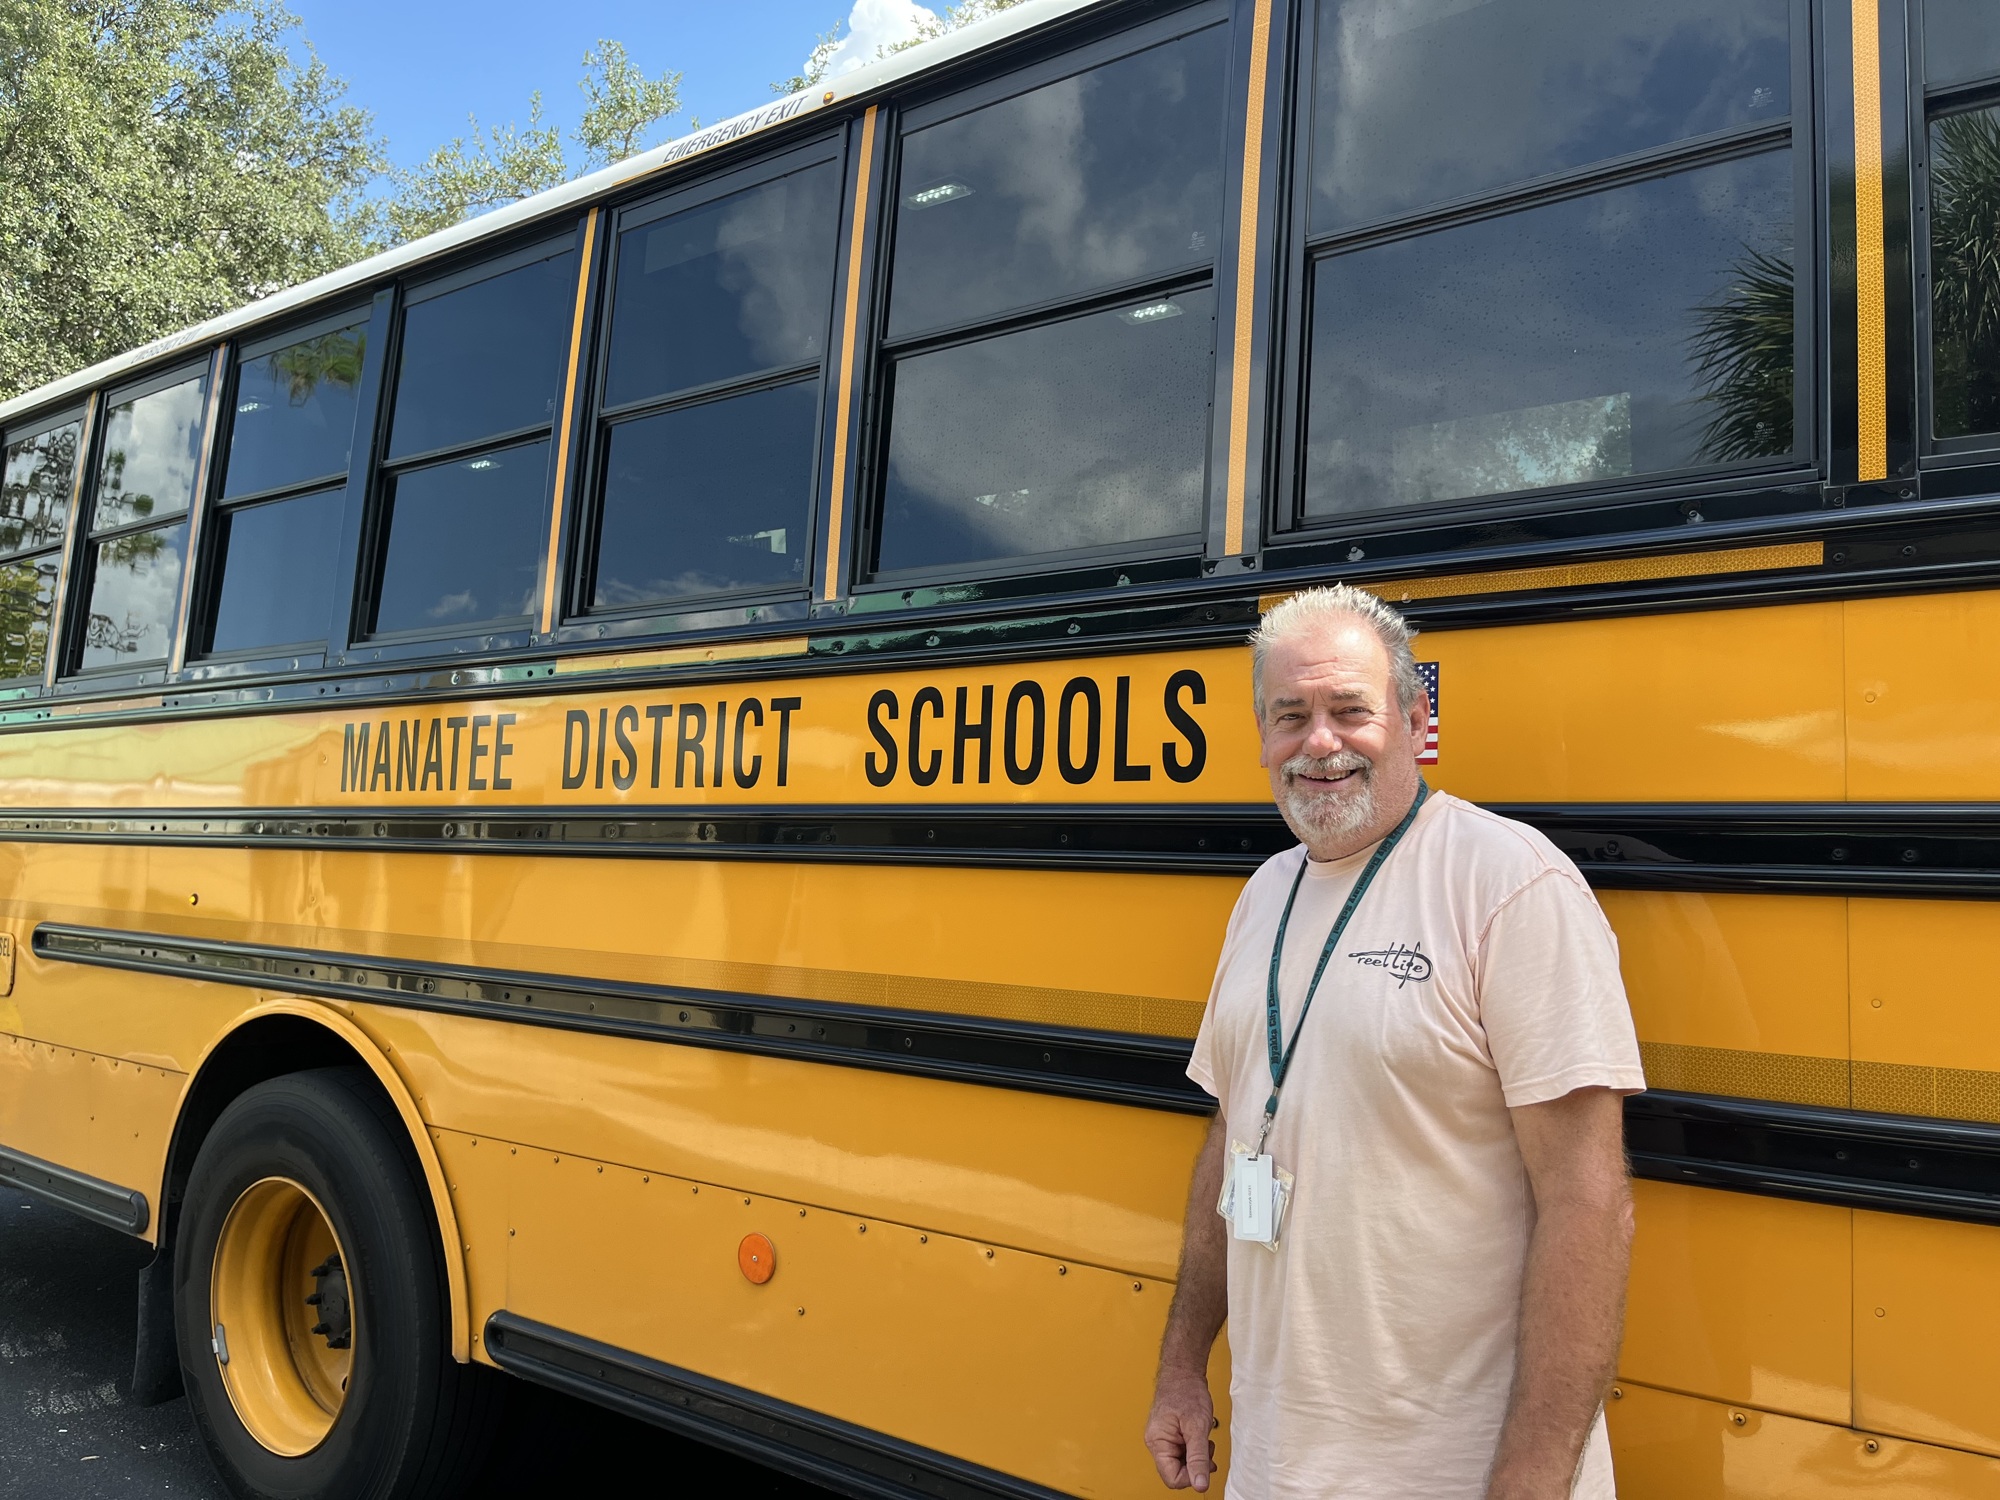 Joe Szewczyk, a physical education teacher at Myakka City Elementary School, has volunteered to go through training to receive a commercial driver's license so he can drive a bus for students at his school. (Photo by Liz Ramos)